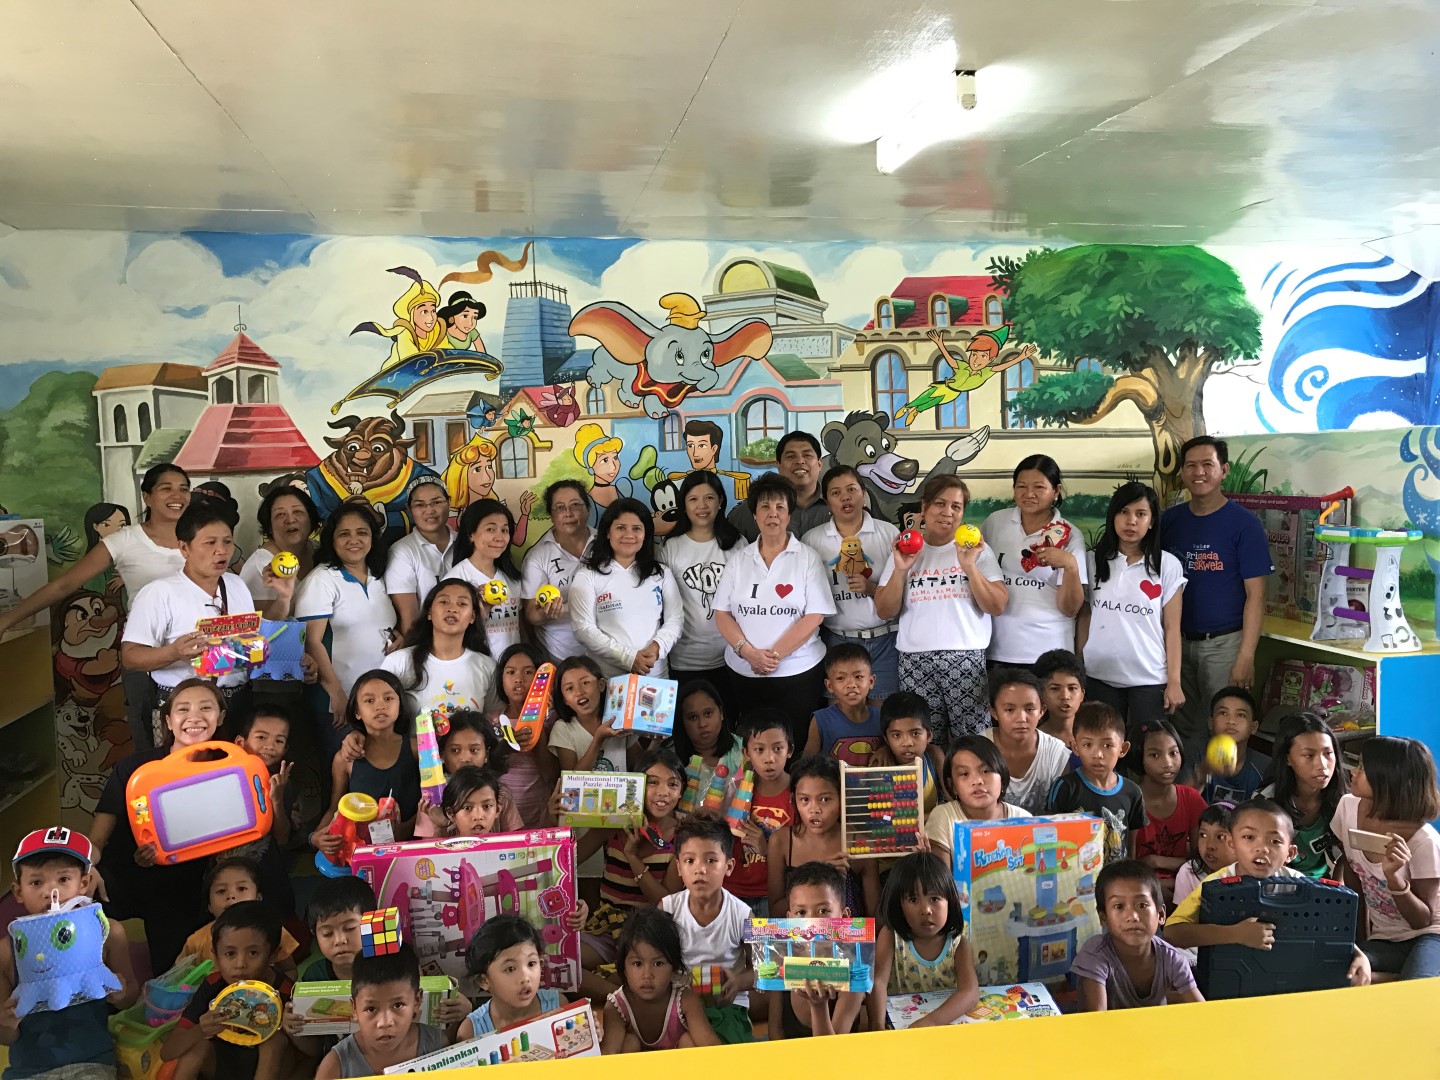 The Coop team is shown with Sta. Cruz Elementary School pupils during the turnover of the toy library to the school.